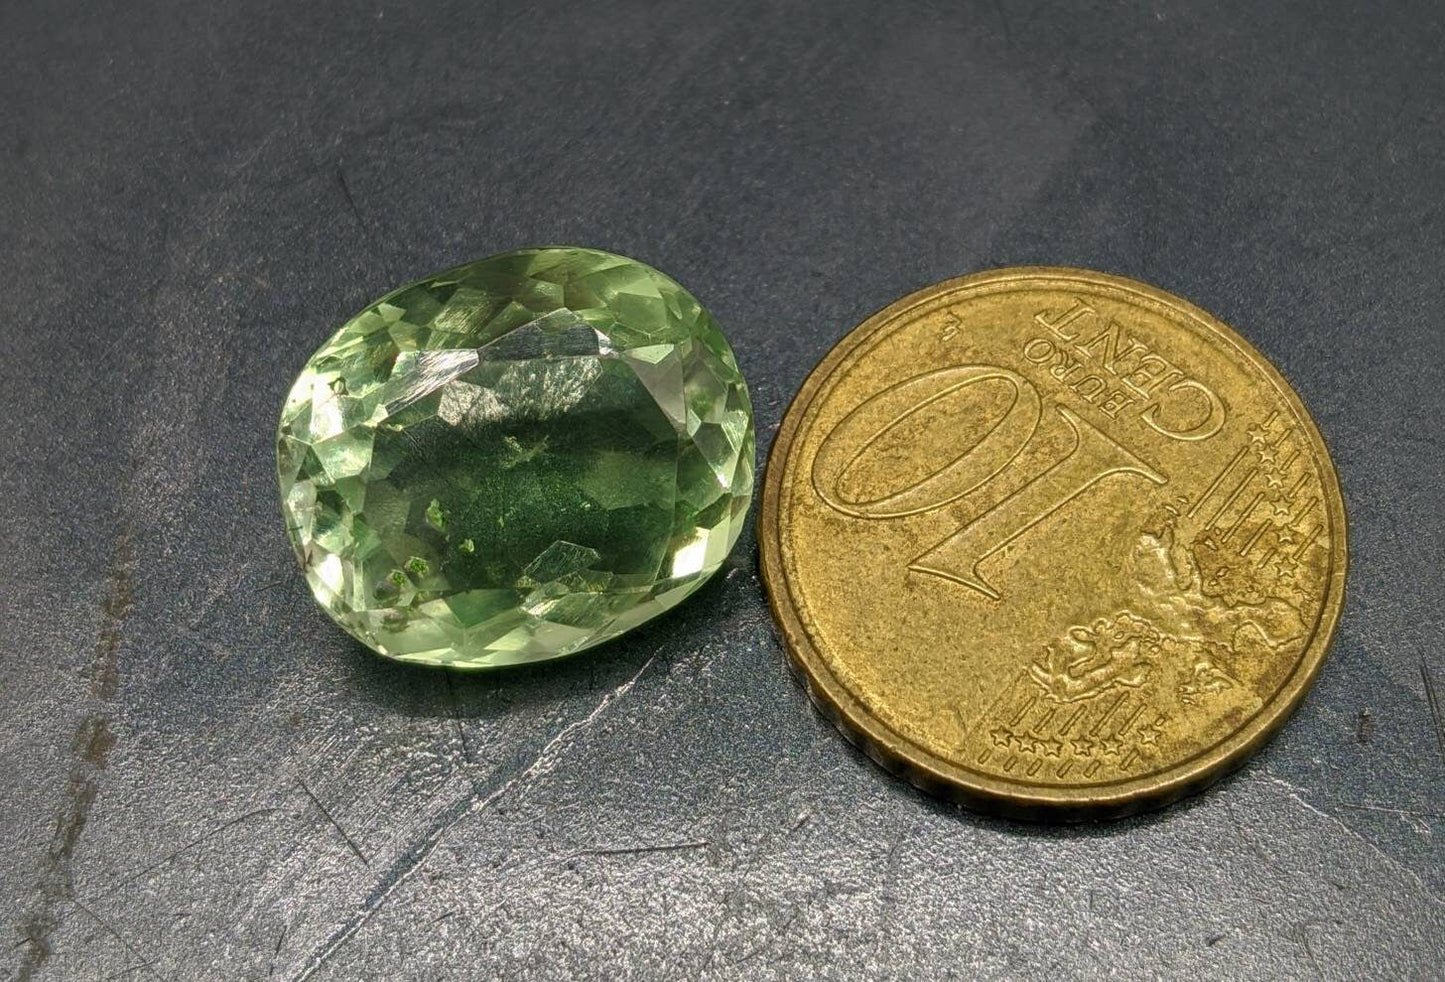 ARSAA GEMS AND MINERALSNatural aesthetic Beautiful 14 carats green fluorite faceted oval shape gem - Premium  from ARSAA GEMS AND MINERALS - Just $28.00! Shop now at ARSAA GEMS AND MINERALS